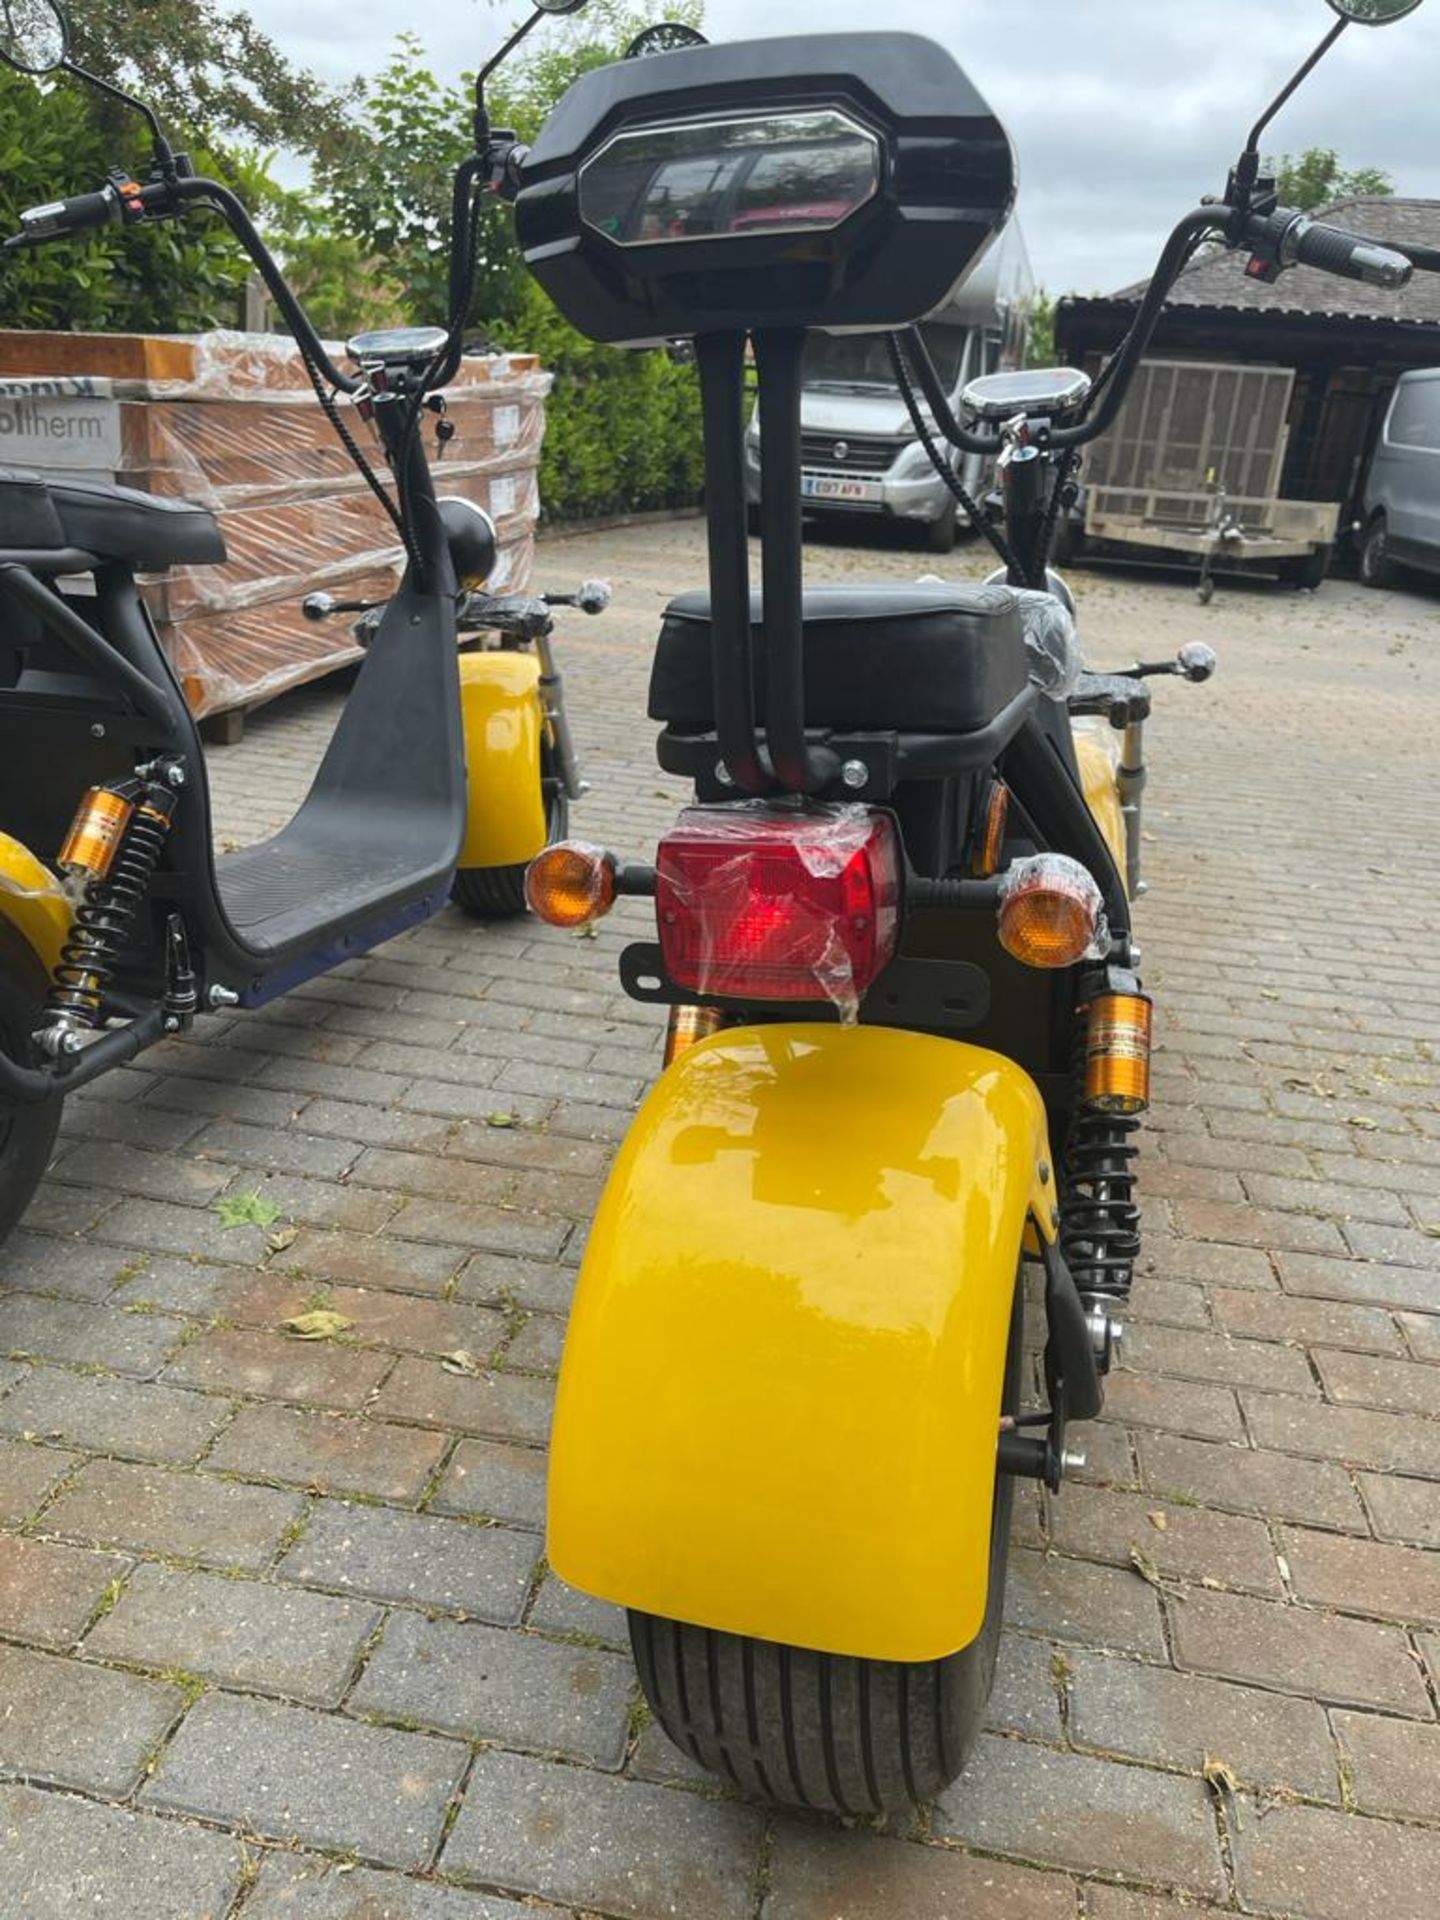 NEW ELECTRIC SCOOTER, WIDE FATBOY TYRES, 1500W 60V 45km/h, CAN BE ROAD REGISTERED *PLUS VAT* - Image 3 of 18